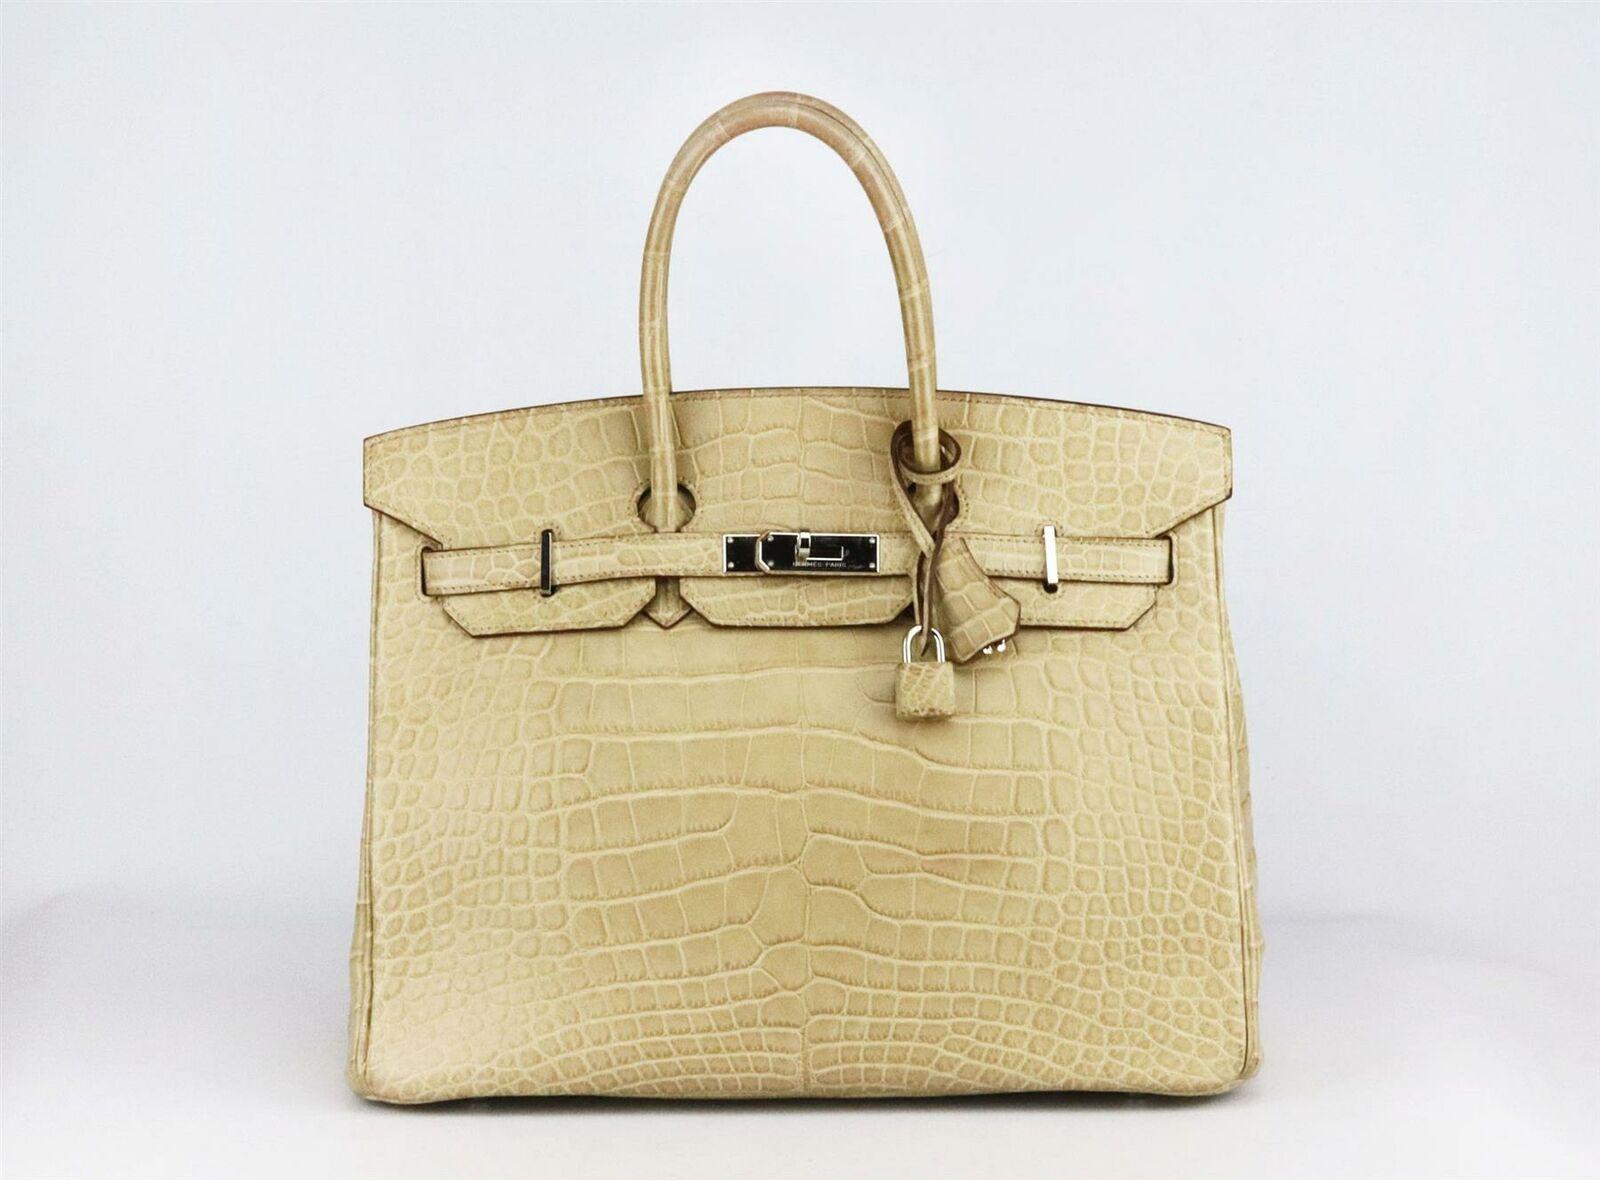 Made in France, this beautiful 2010 Hermès ‘Birkin’ 35cm handbag has been made from Matte Niloticus Crocodile exterior in ‘Poussiere’ beige and matching leather interior, this piece is decorated with palladium hardware on the front and finished with